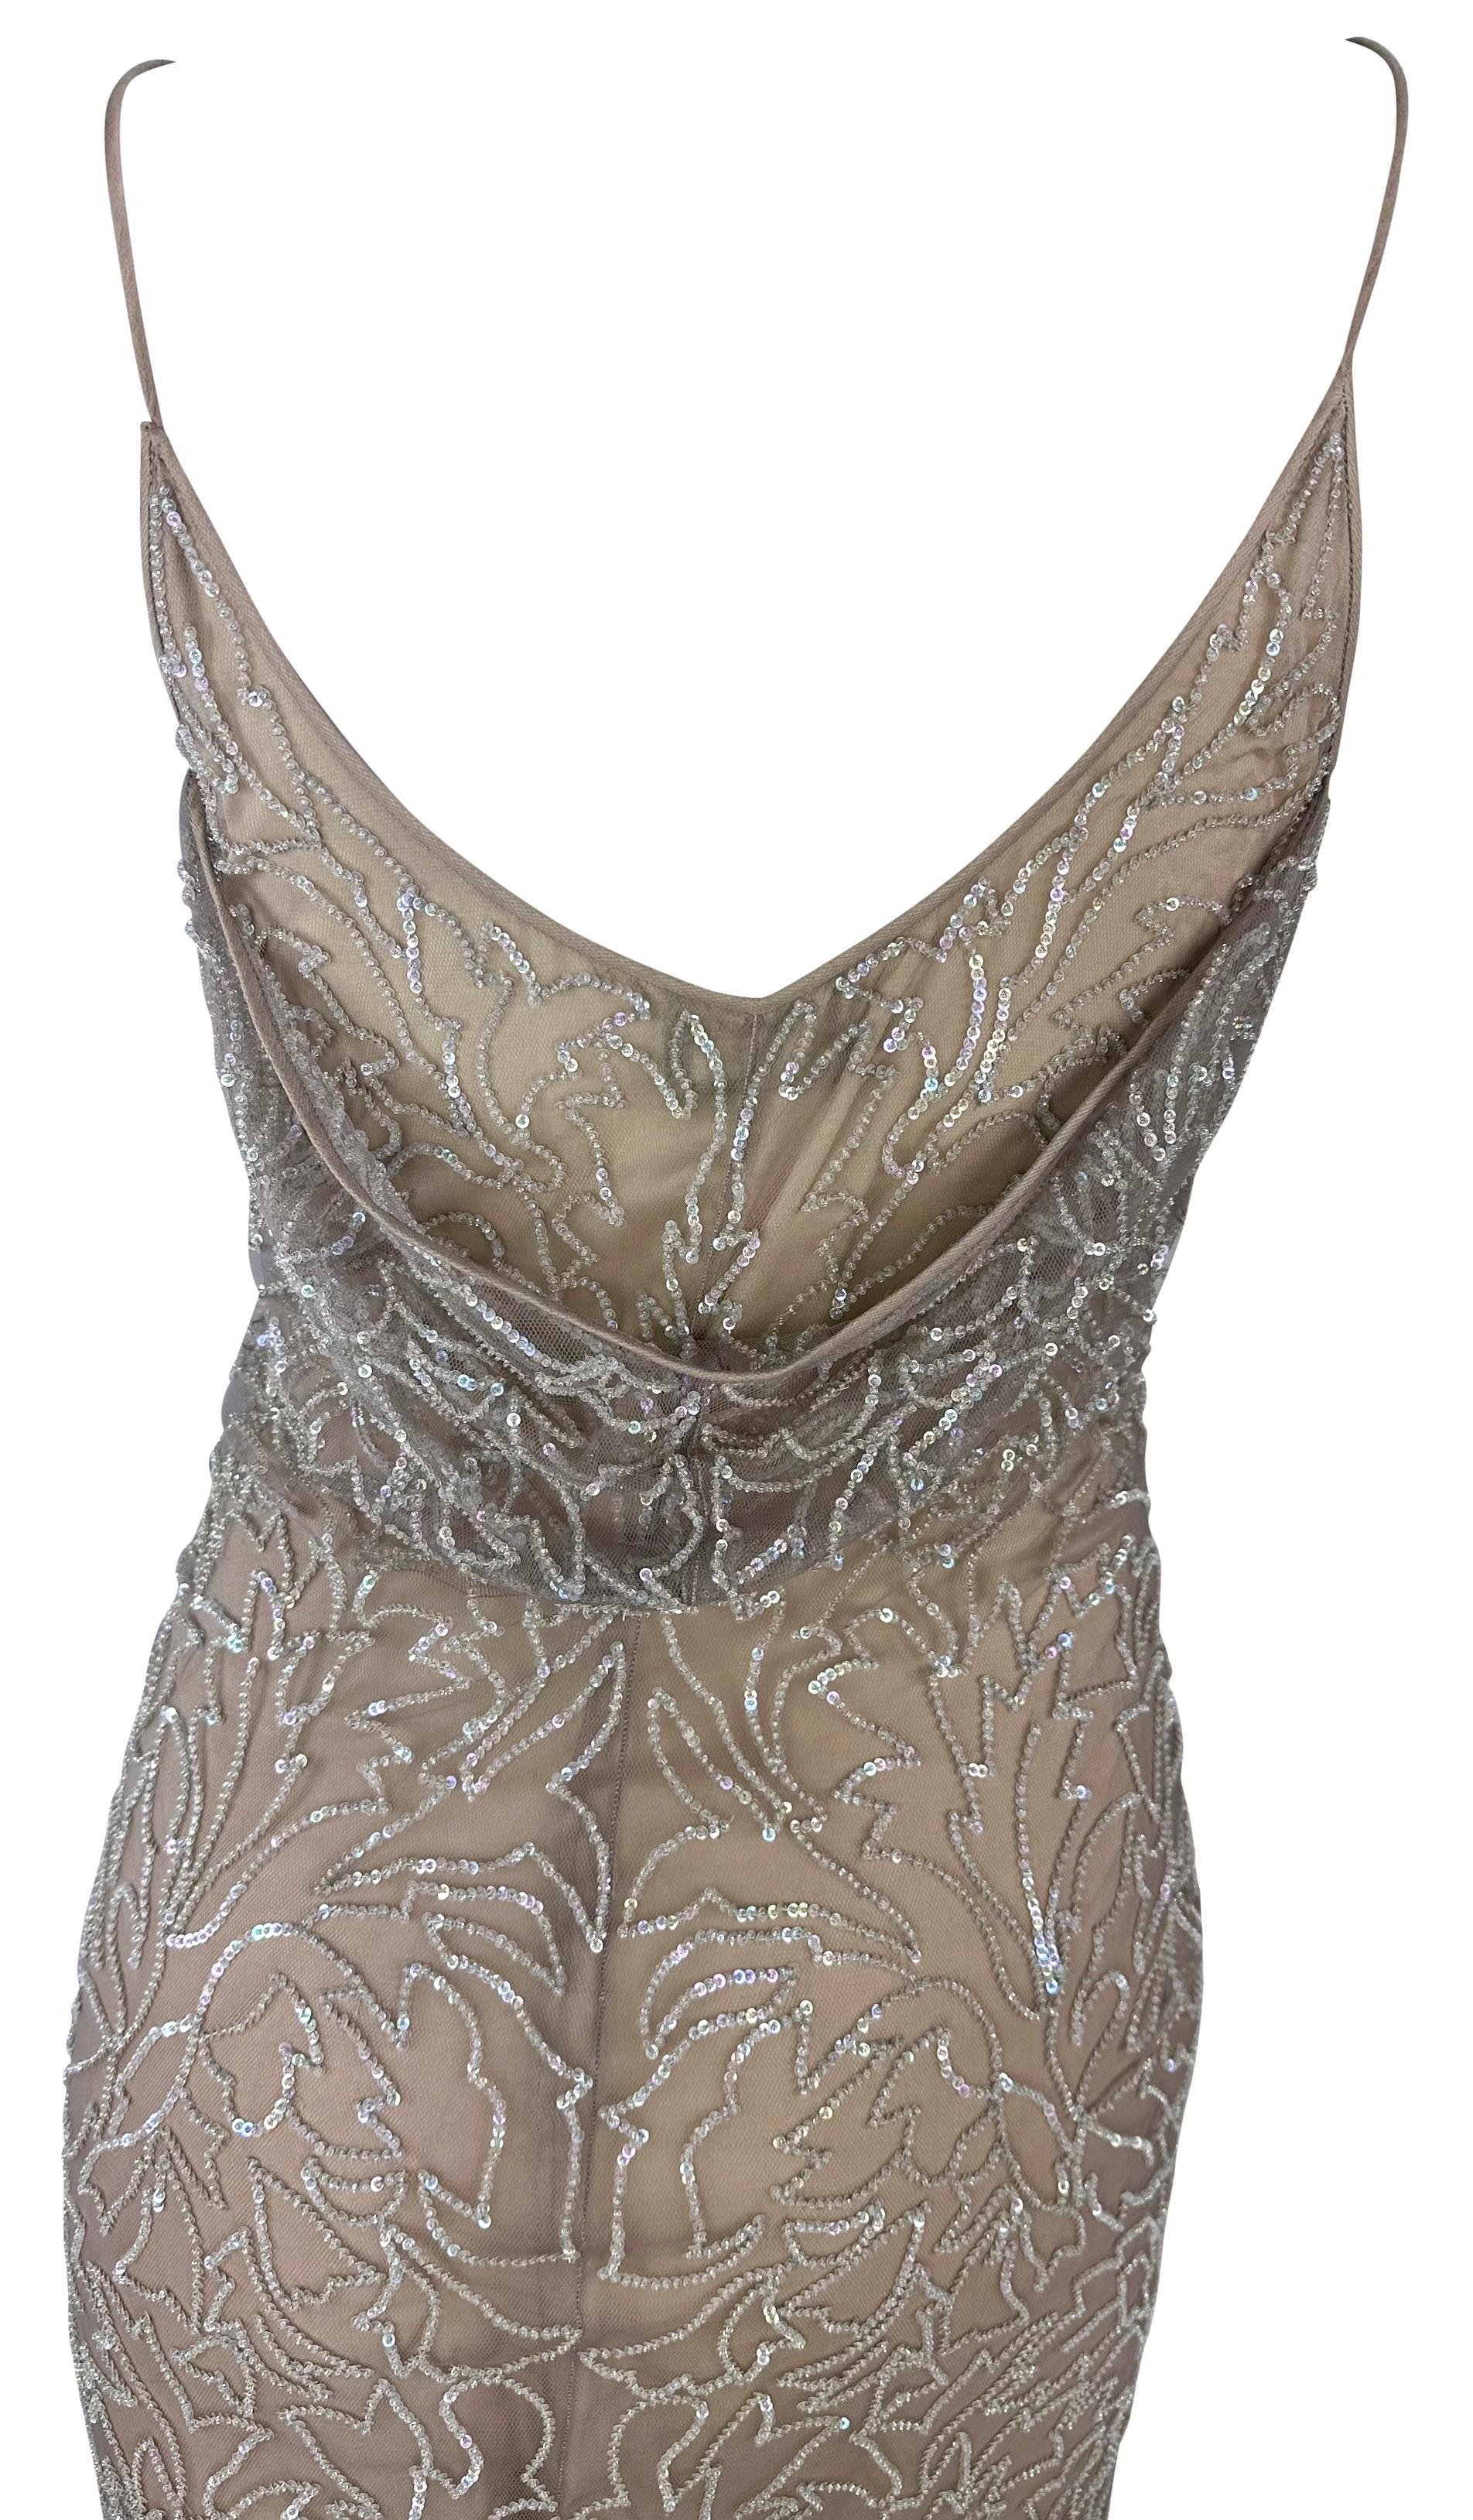 This beige Giorgio Armani gown from the late 1990s is a beautiful piece adorned with a floral print that sparkles with thousands of meticulously hand-sewn sequins. Its slip-style design boasts delicate thin straps, a graceful low scoop neckline, and